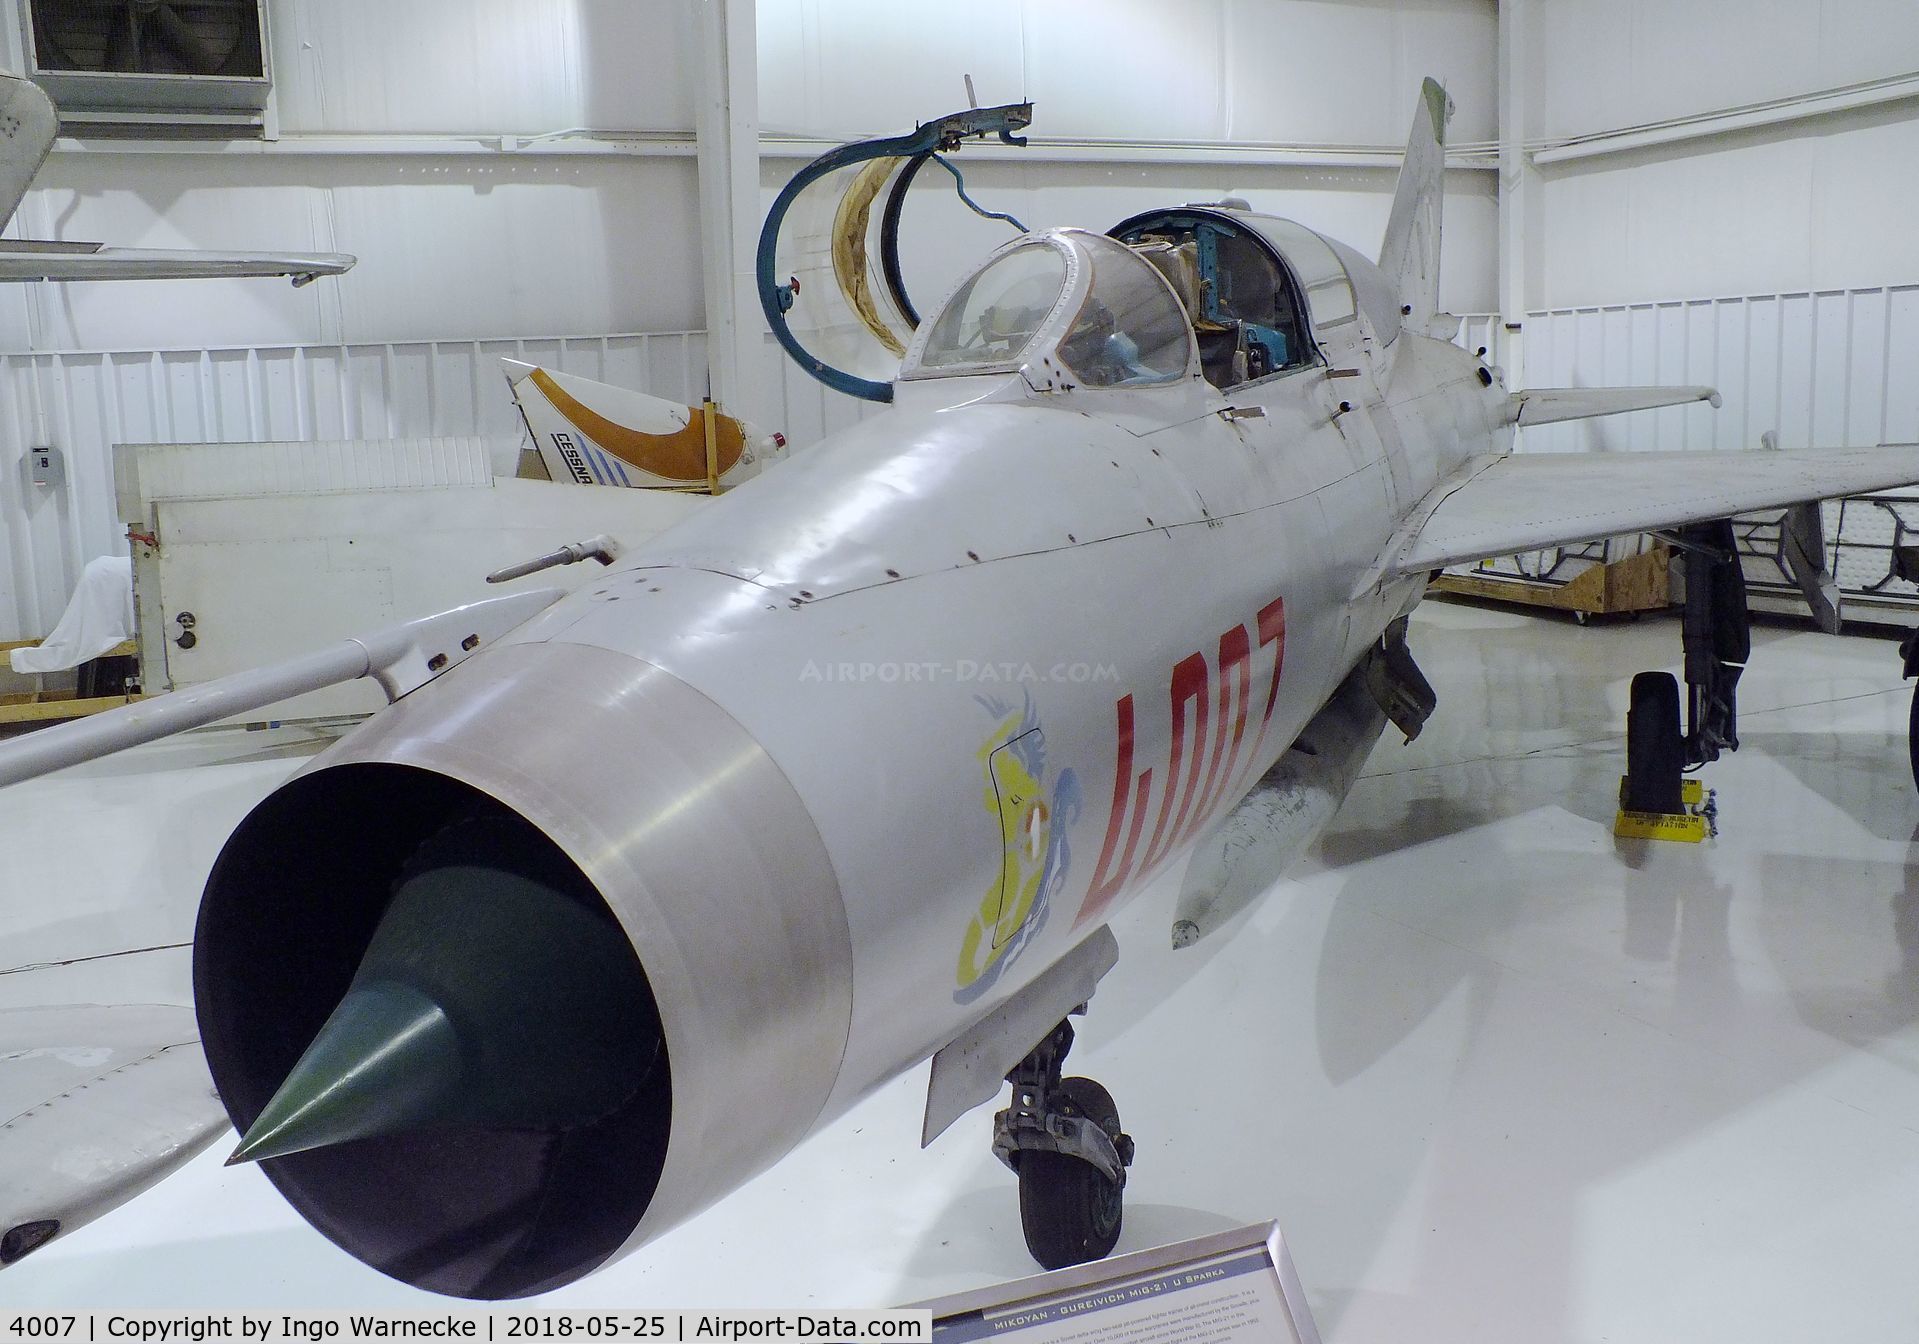 4007, Mikoyan-Gurevich MiG-21US C/N 07685140, Mikoyan i Gurevich MiG-21US MONGOL-B at the Tennessee Museum of Aviation, Sevierville TN